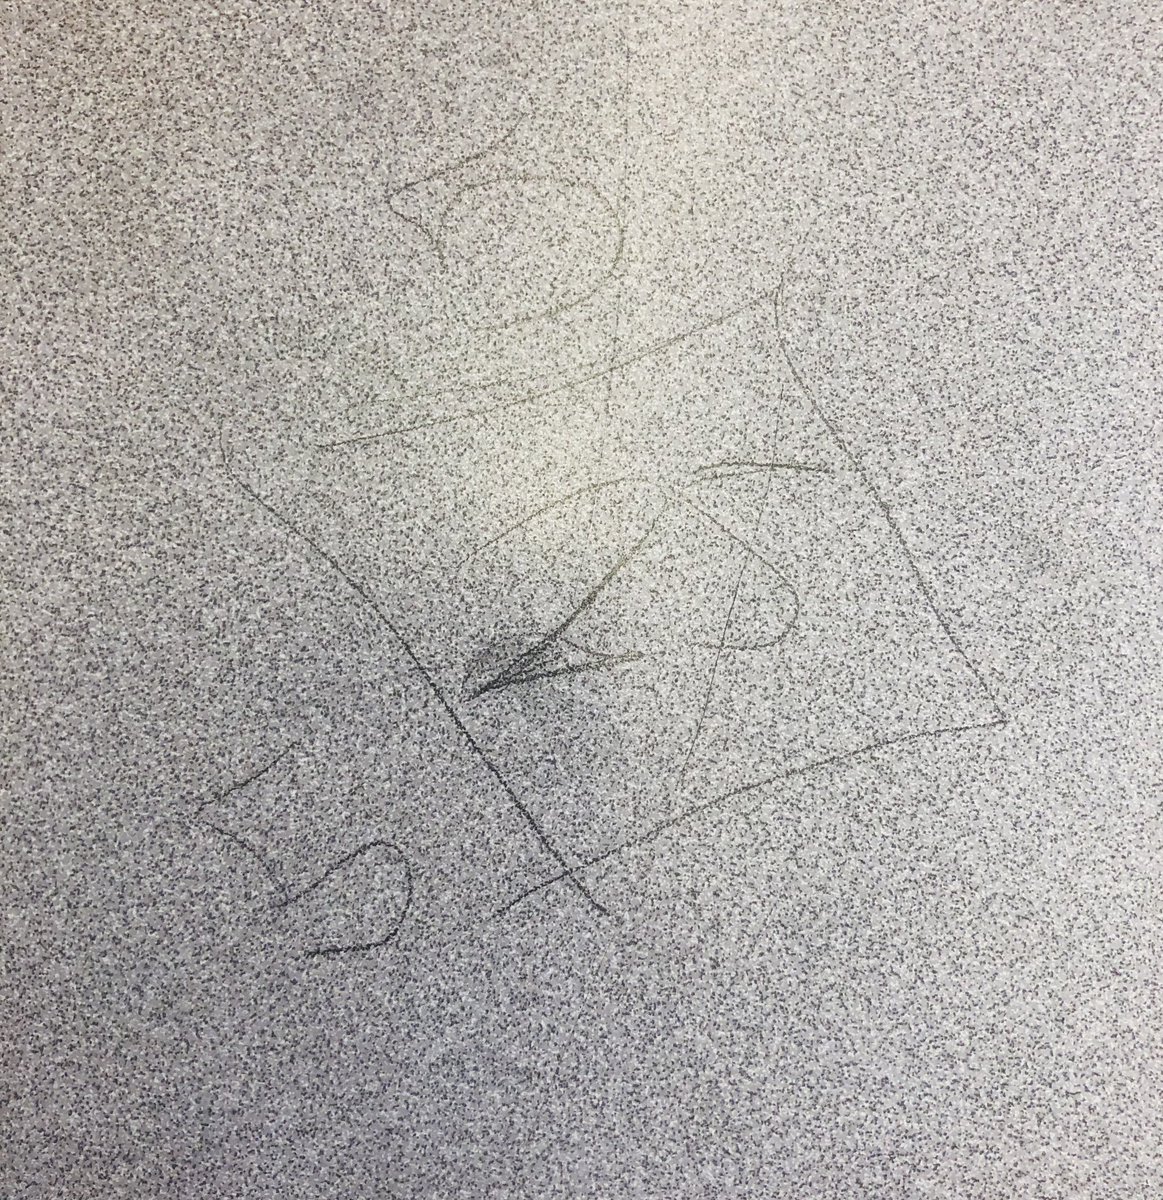 Finally, some desk art I can see the value in! #middleschoolmath